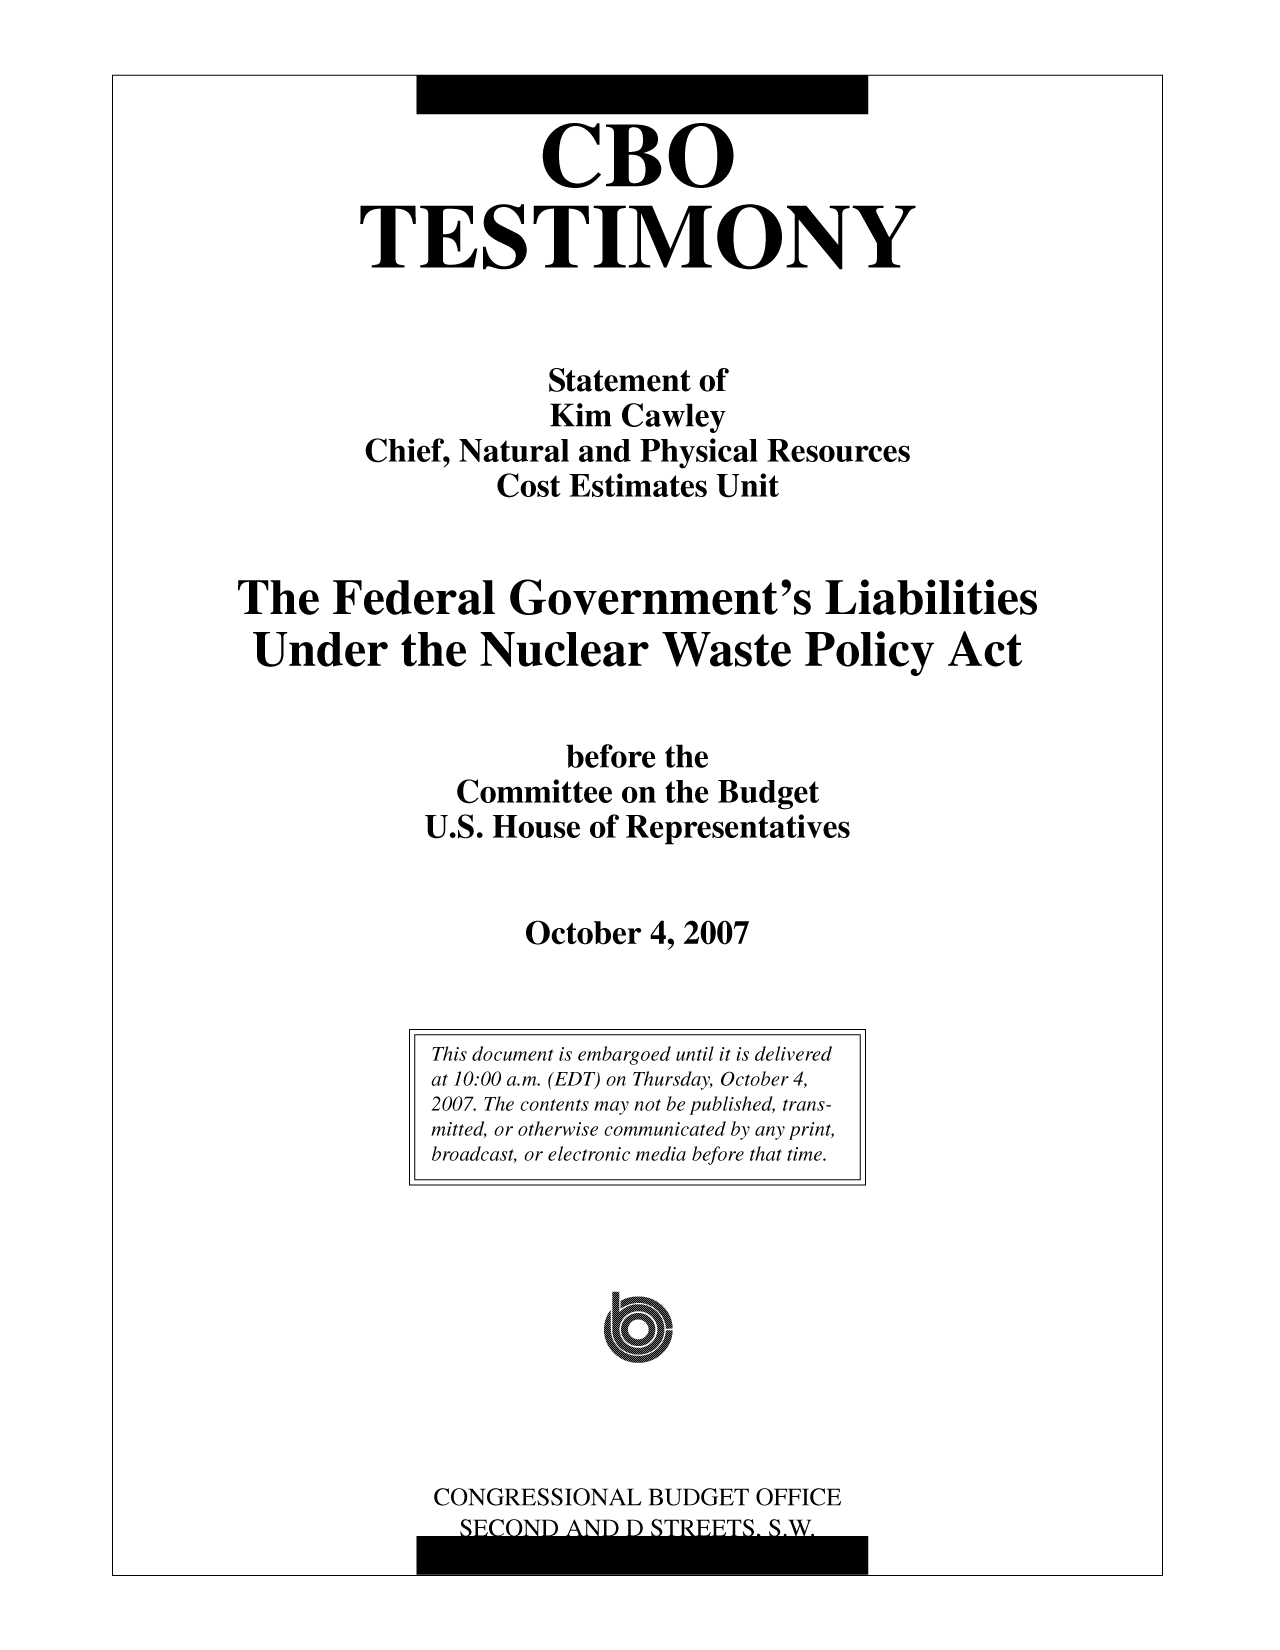 handle is hein.congrec/cbo10070 and id is 1 raw text is: CBO
TESTIMONY
Statement of
Kim Cawley
Chief, Natural and Physical Resources
Cost Estimates Unit
The Federal Government's Liabilities
Under the Nuclear Waste Policy Act
before the
Committee on the Budget
U.S. House of Representatives
October 4, 2007

CONGRESSIONAL BUDGET OFFICE

This document is embargoed until it is delivered
at 10:00 a.m. (EDT) on Thursday, October 4,
2007. The contents may not be published, trans-
mitted, or otherwise communicated by any print,
broadcast, or electronic media before that time.

i


